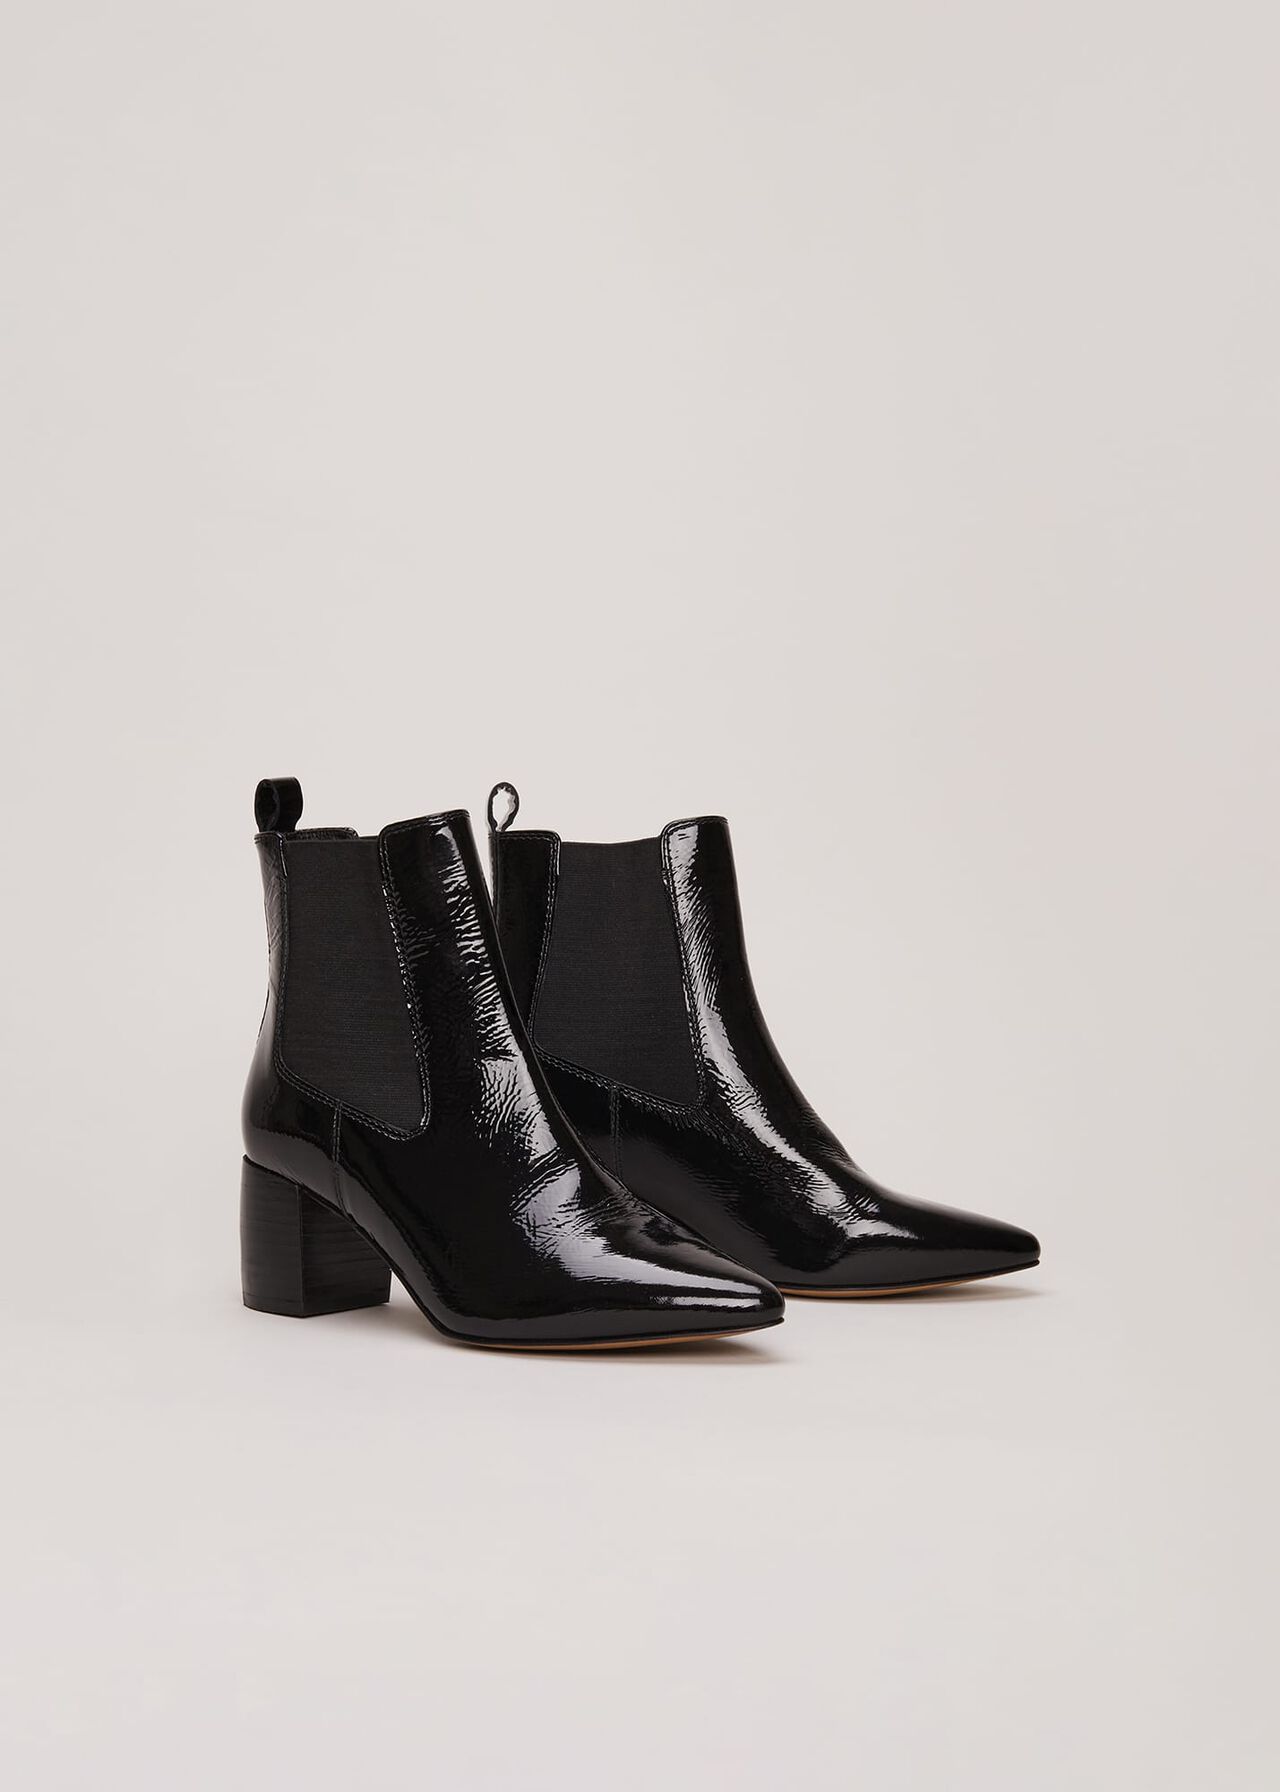 Black Leather Patent Ankle Boots